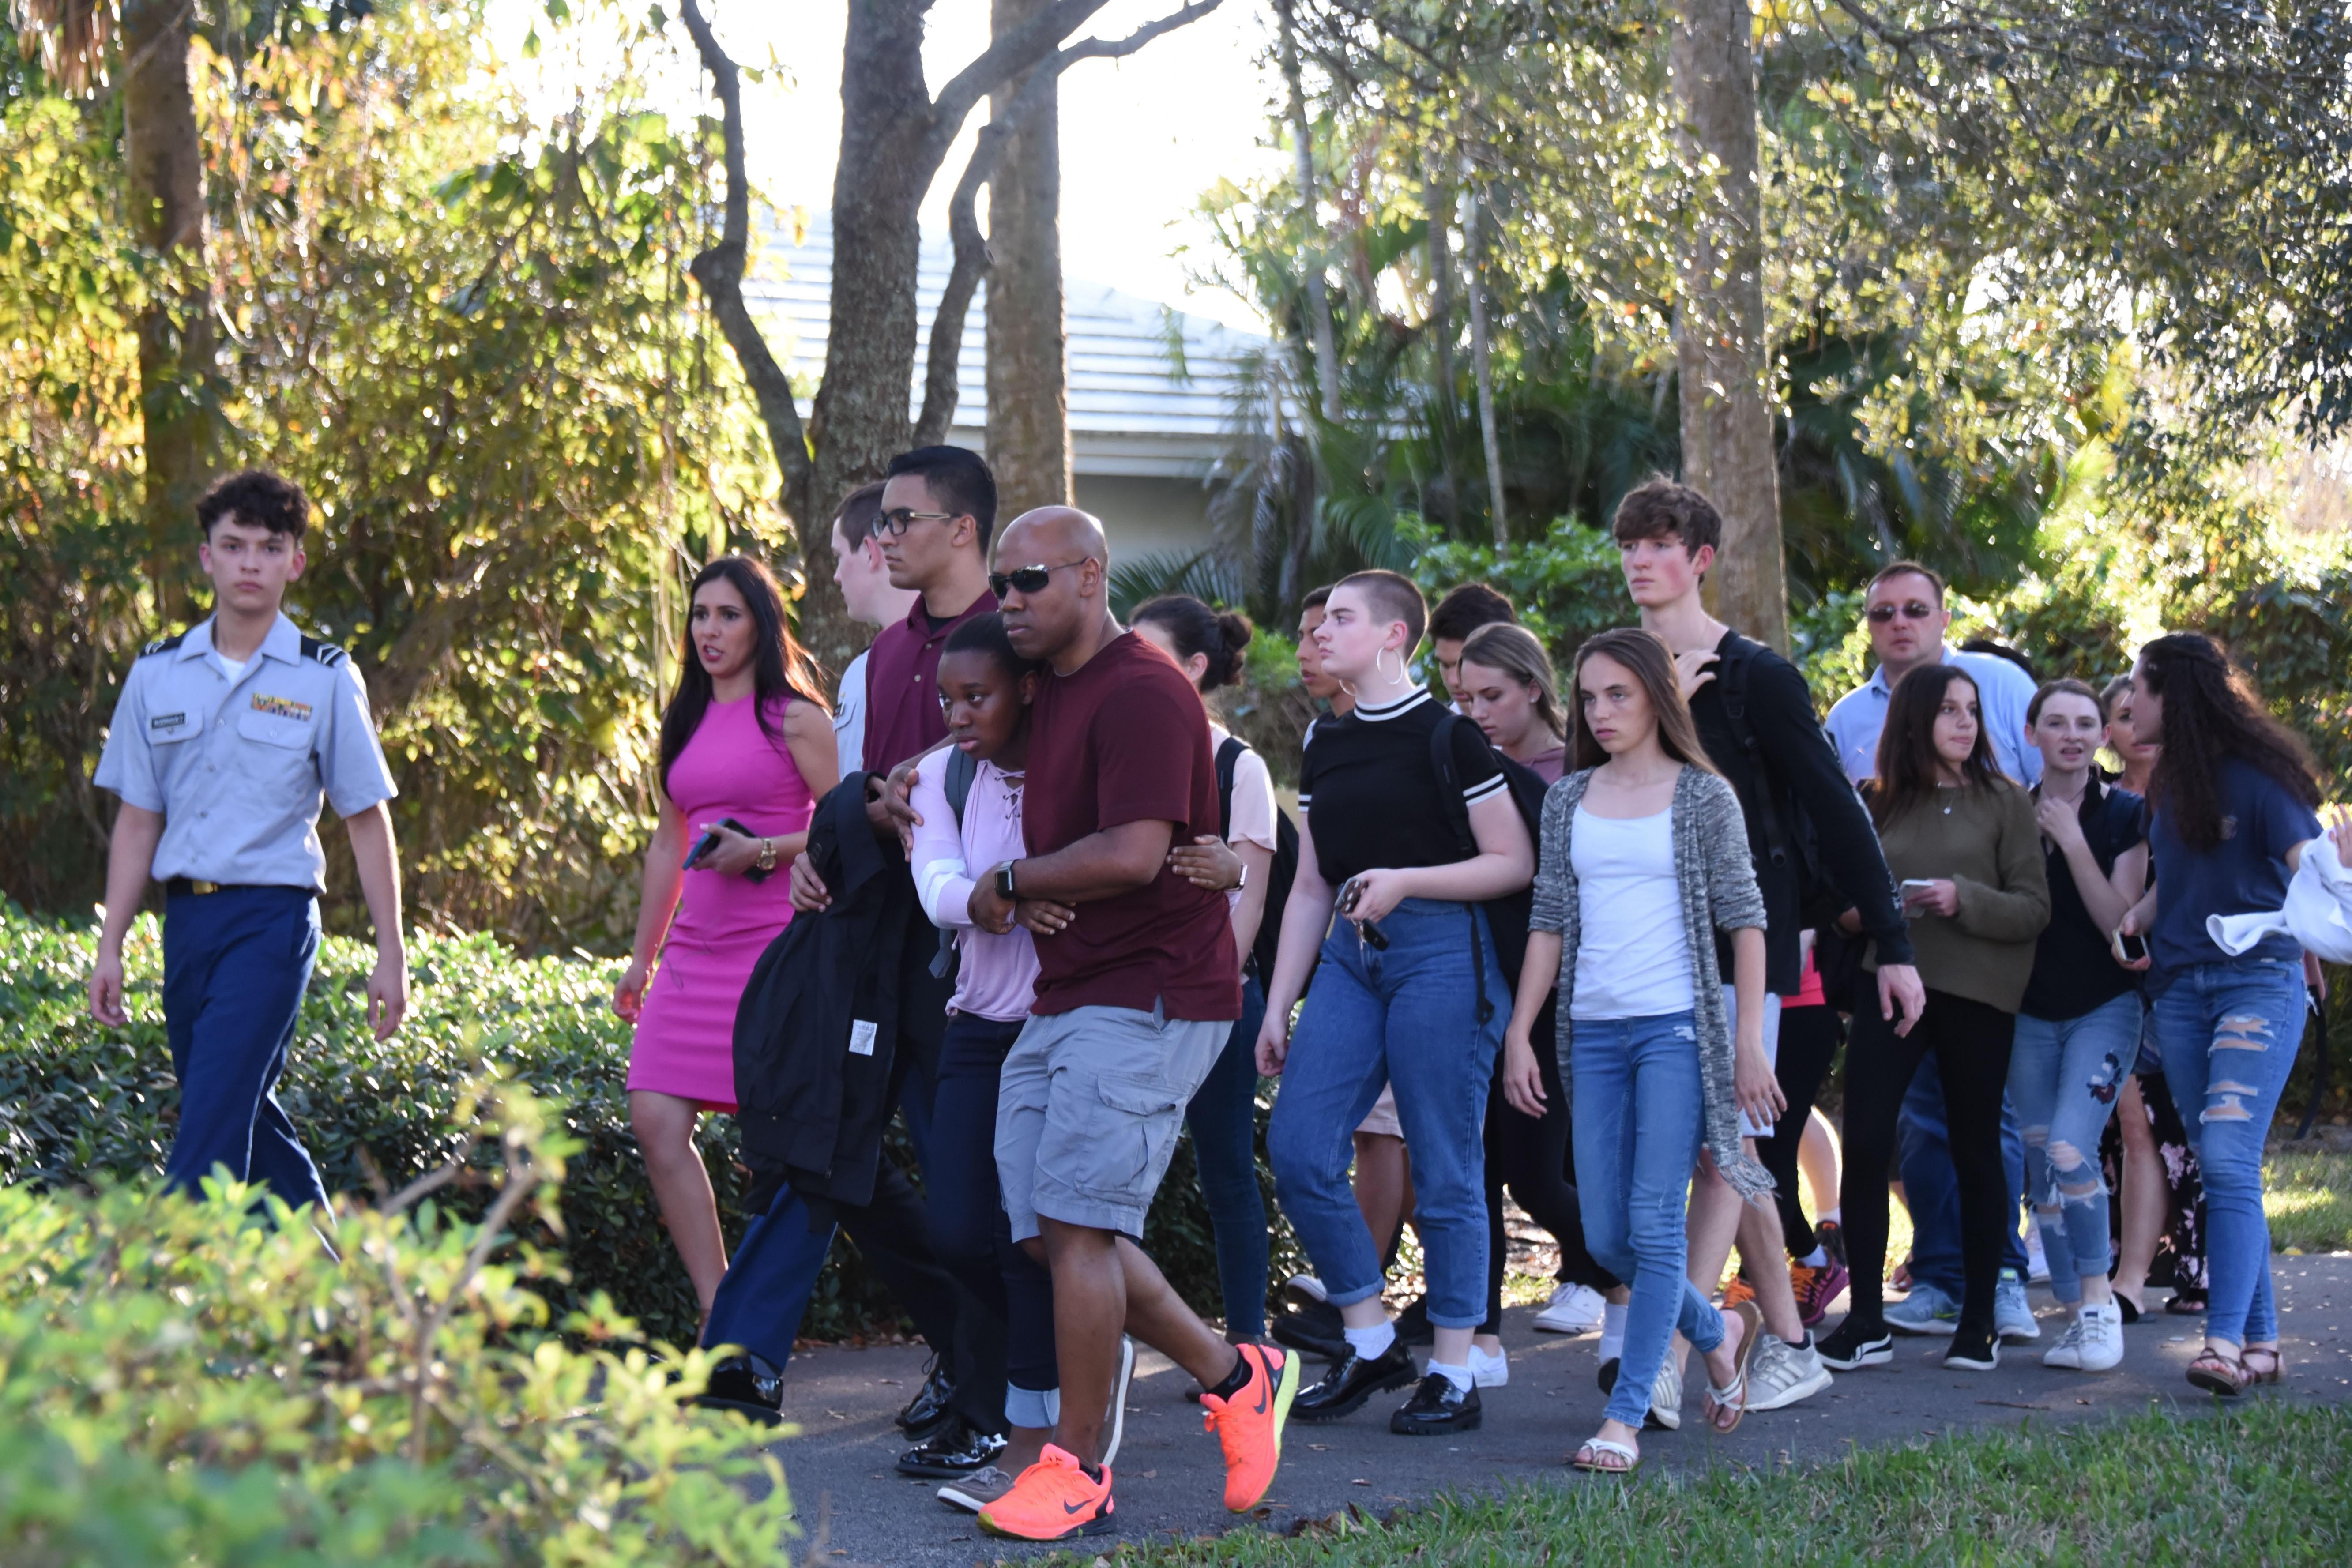 Students react following a shooting at Marjory Stoneman Douglas High School in Parkland, Florida.